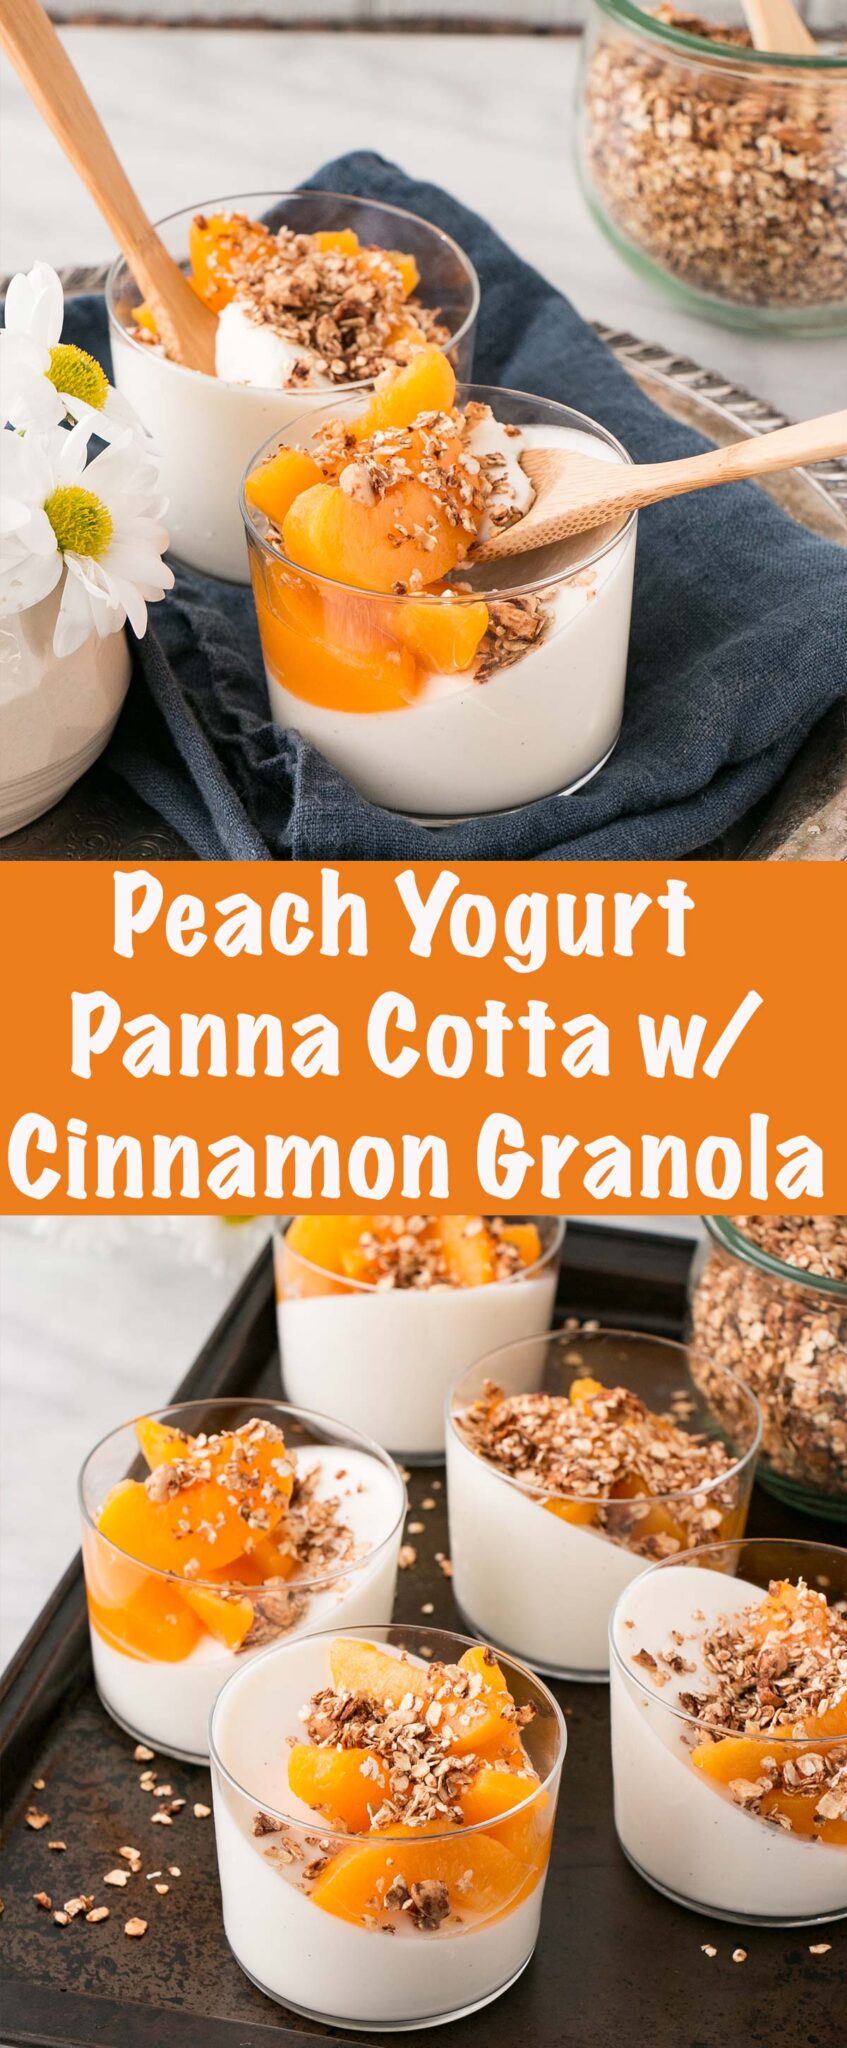 Peach Yogurt Panna Cotta with Cinnamon Granola is a dreamy make ahead breakfast that is perfect for entertaining, Mother's Day, Valentine's Day or anytime you need a special treat for breakfast! #ad #breakfast #mothersday #valentinesday #pannacotta